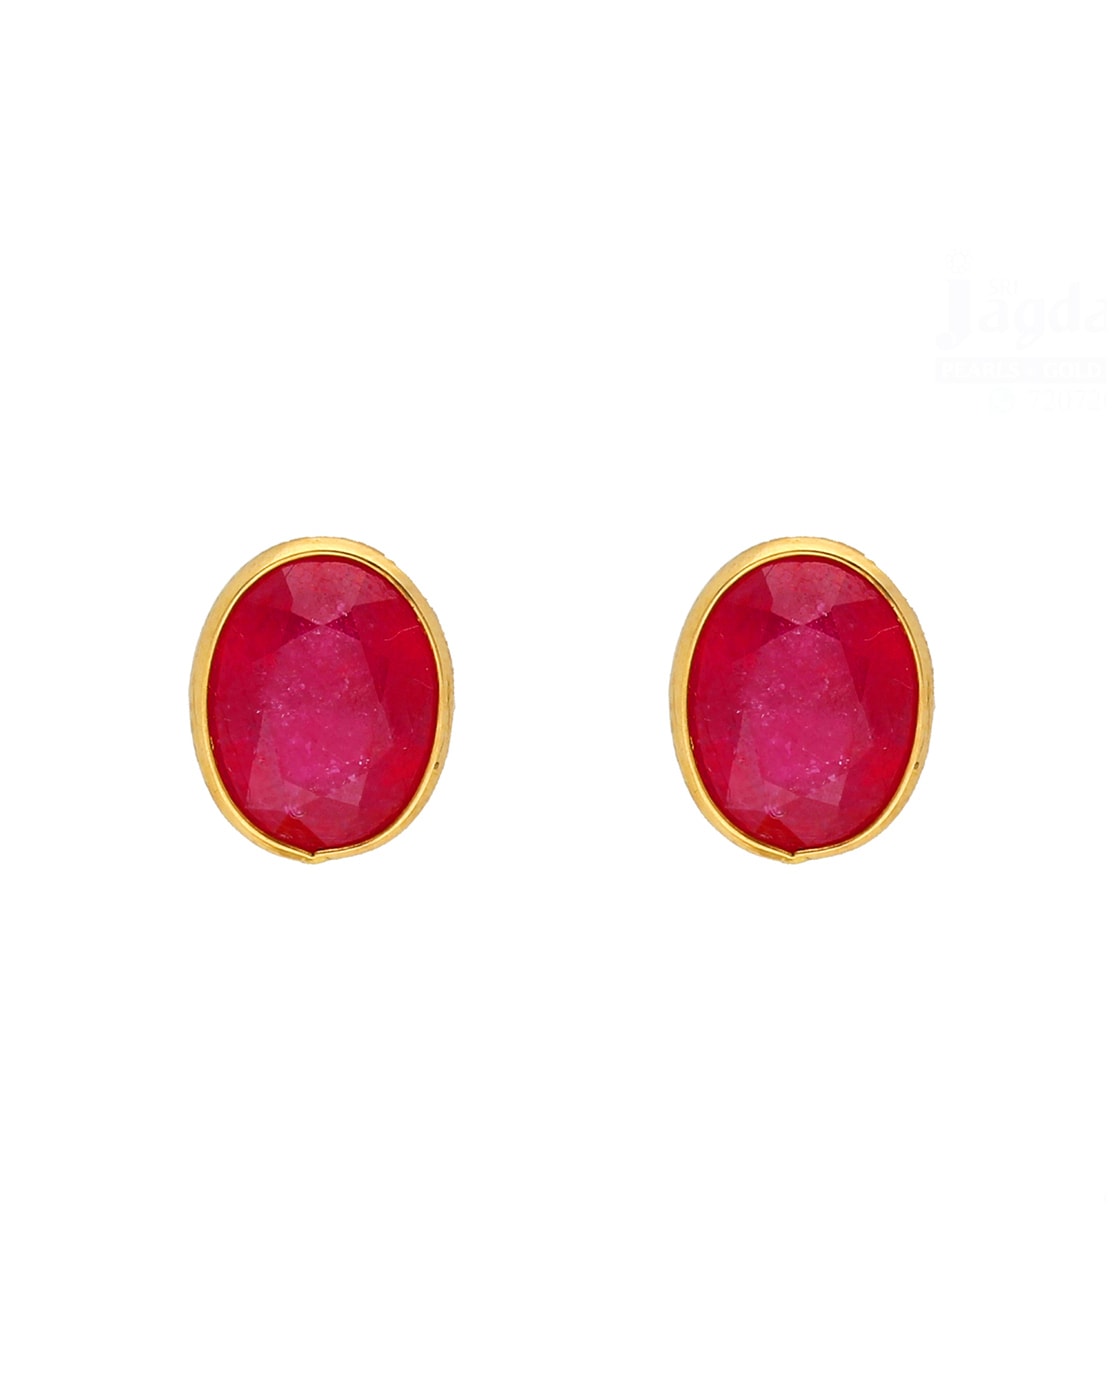 Buy Niassa Ruby Earrings, Solitaire Stud Earrings For Women, Solitaire  Earrings, Round Shape Ruby Solitaire, Platinum Plated Sterling Silver  Earrings 2.90 ctw at ShopLC.